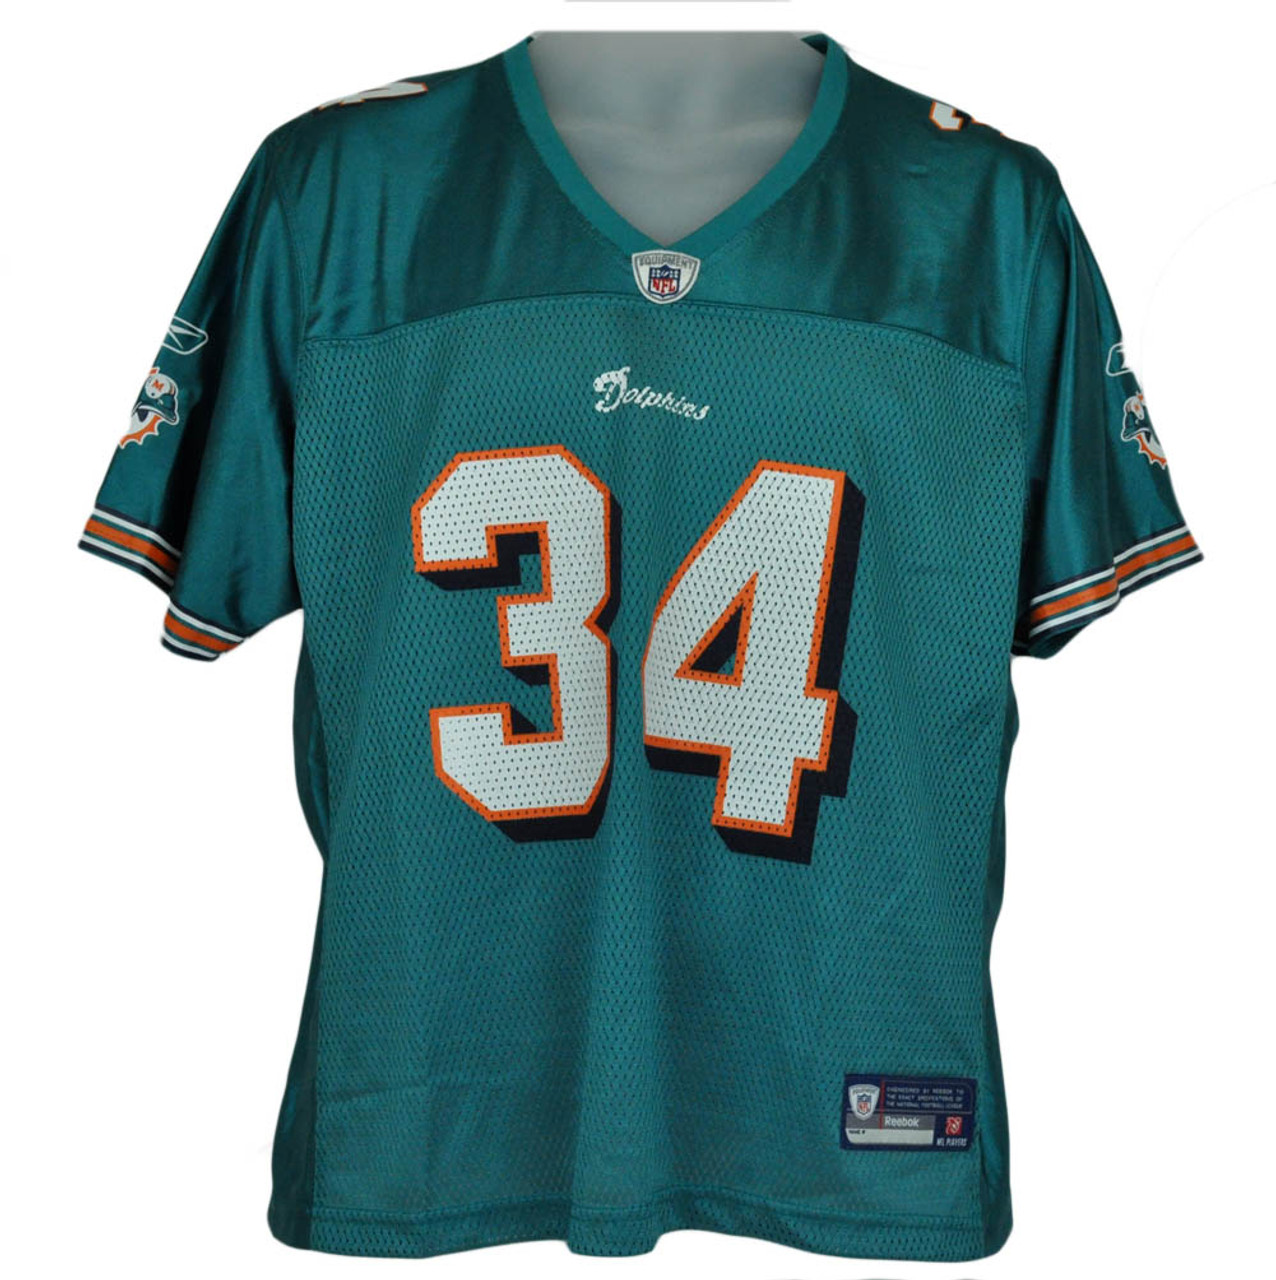 ricky williams dolphins jersey